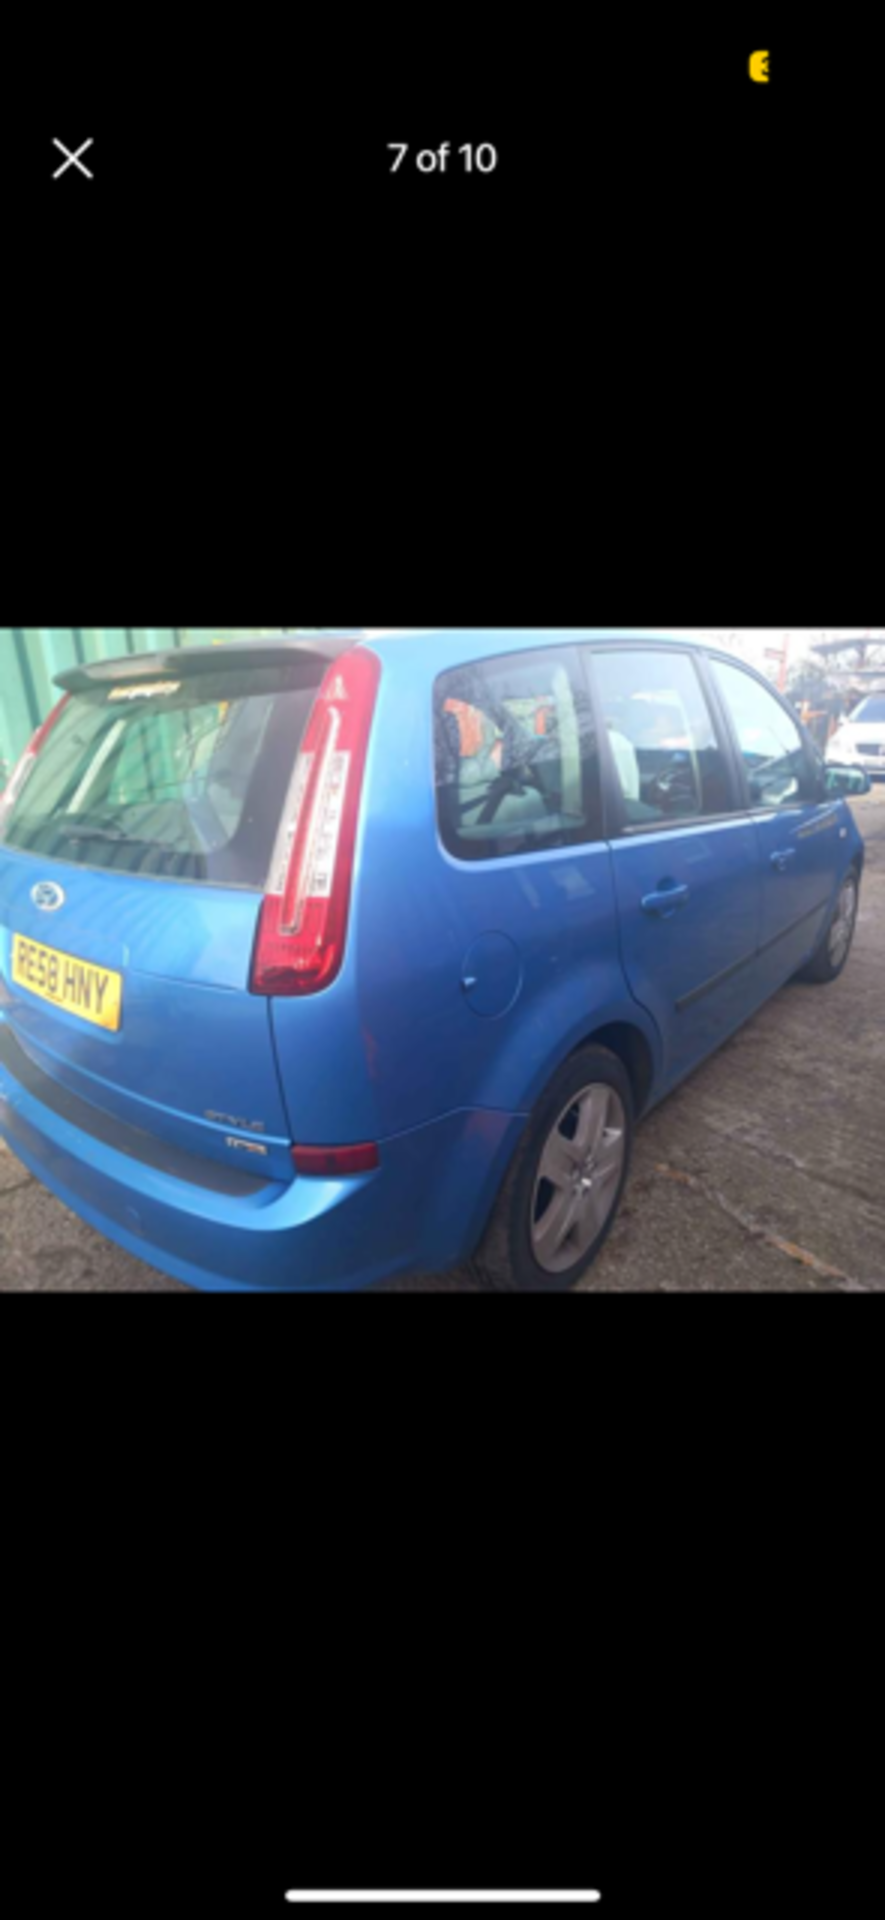 FORD CMAX RE58 HNY - Image 6 of 10